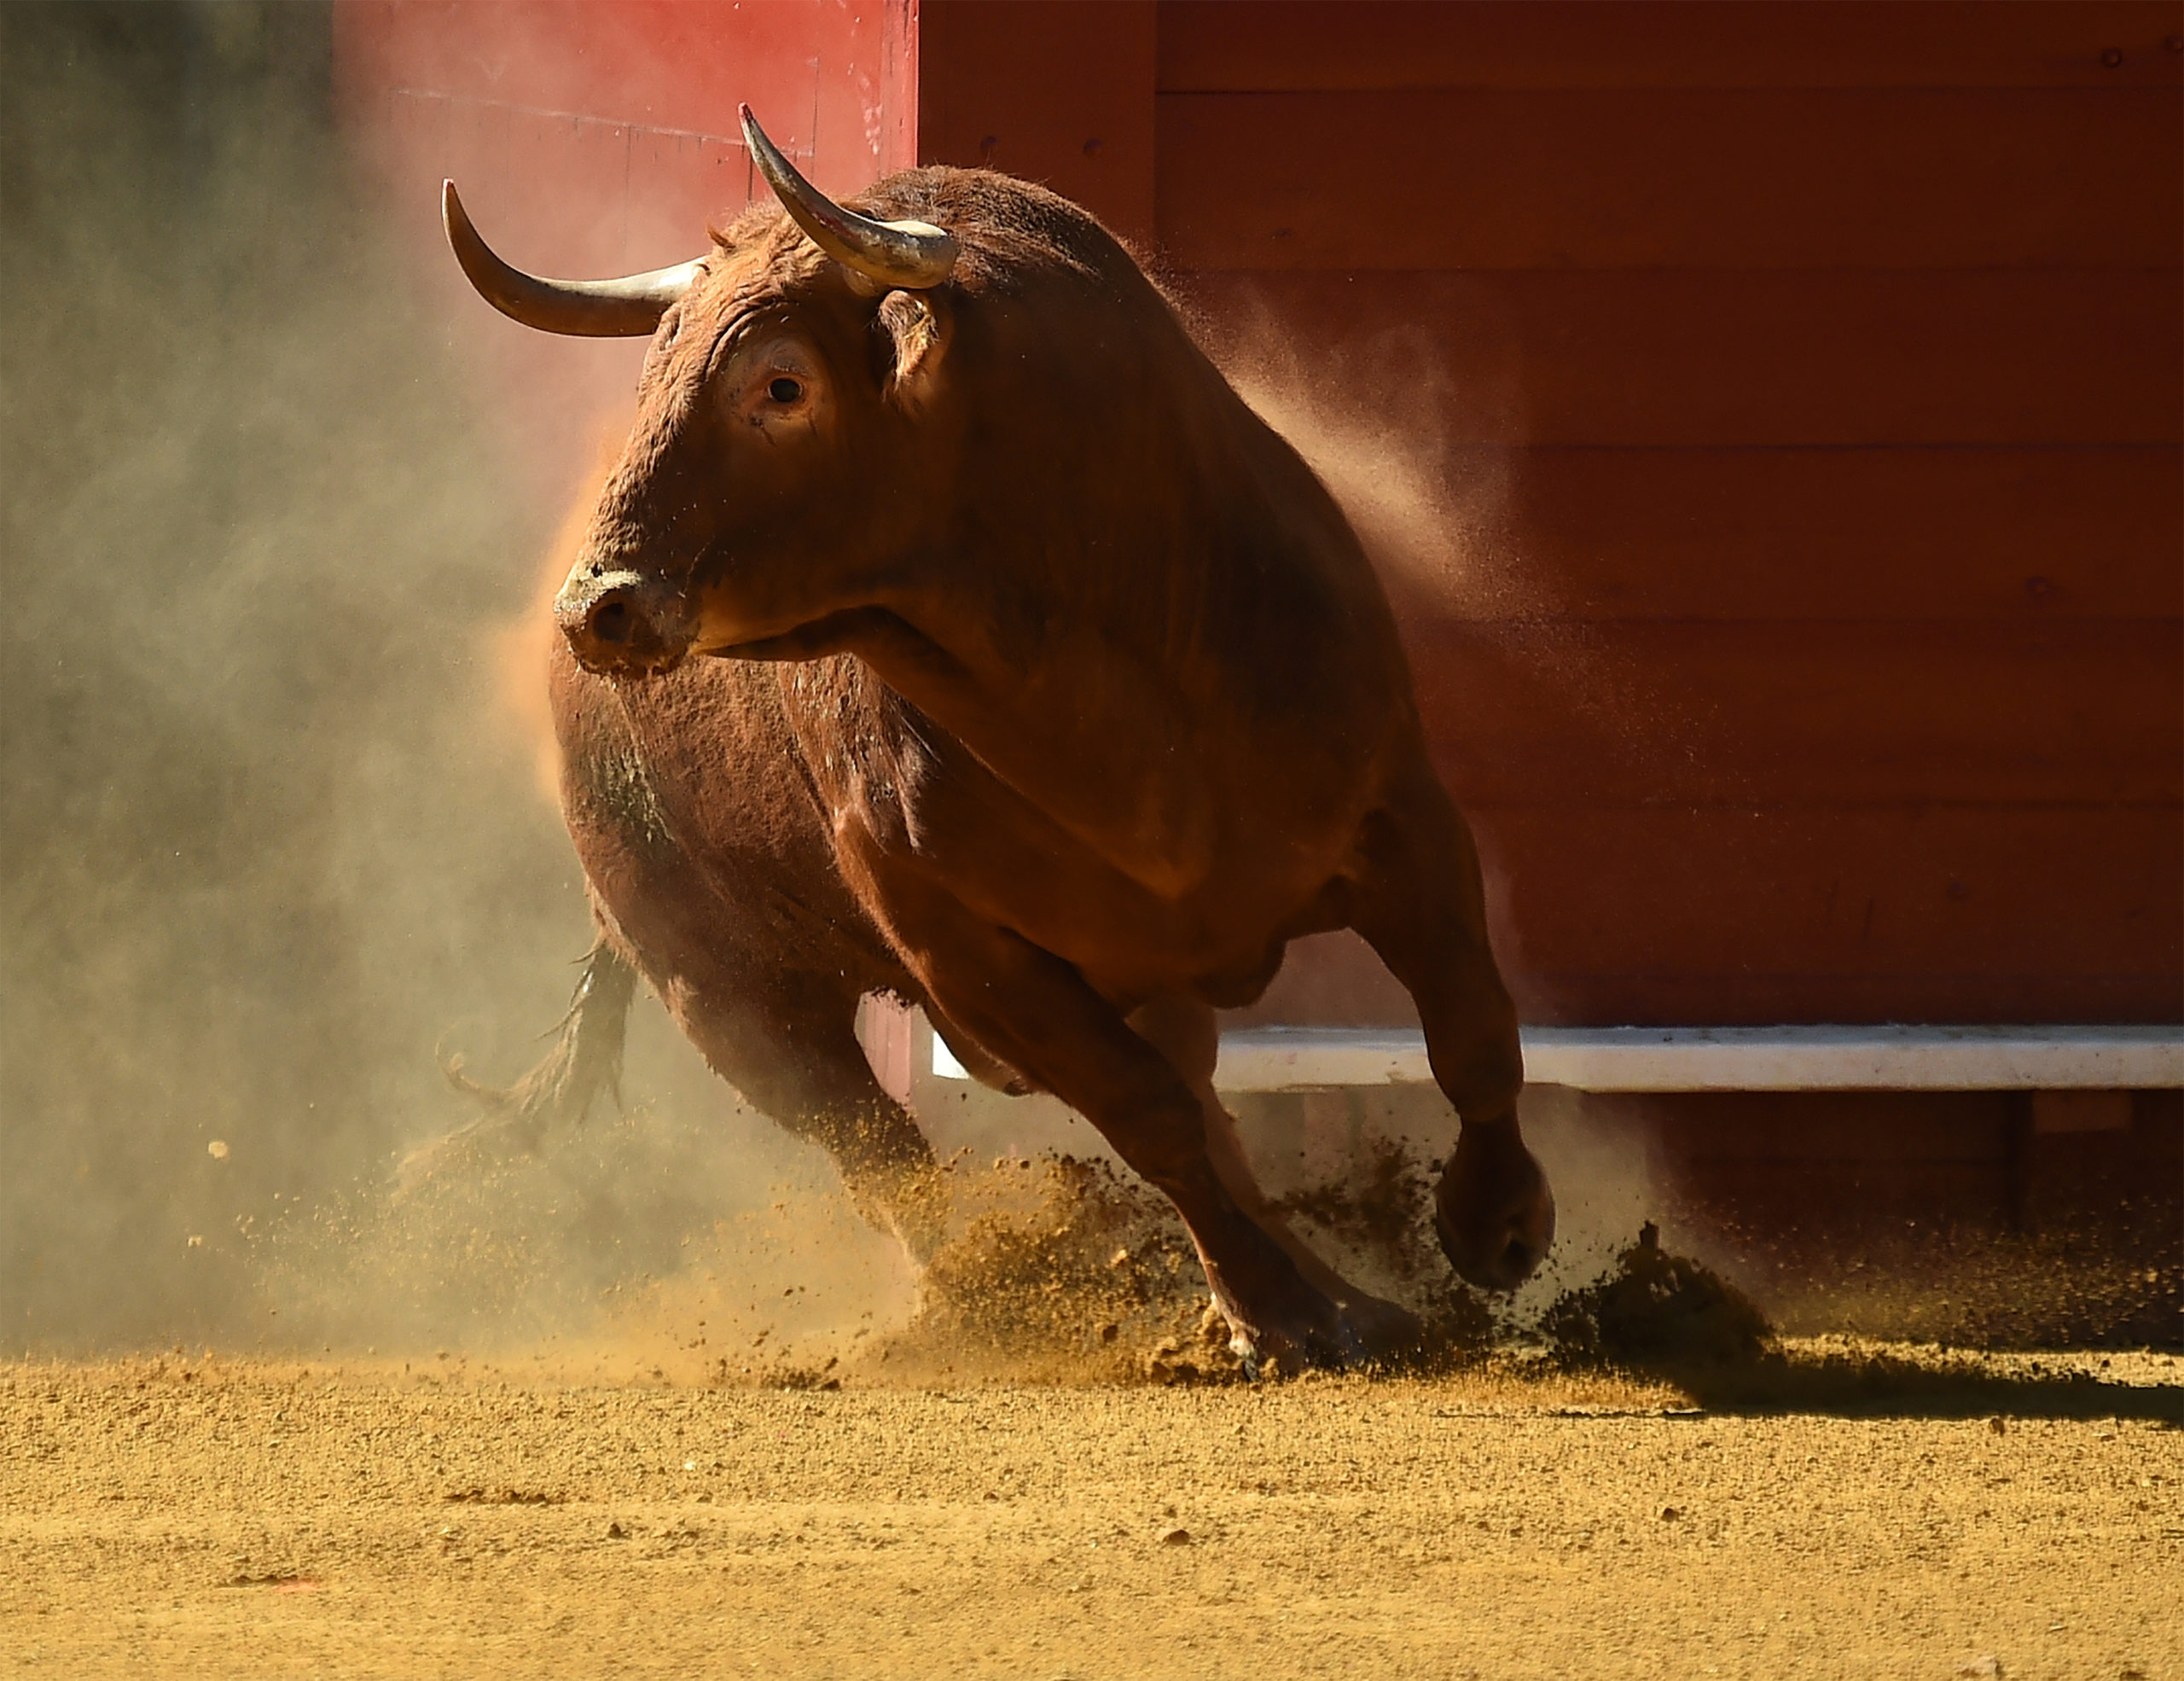 charging bull ring scaled 1 Bitcoin reclaims $21K as US dollar corrects: What analysts are saying about BTC